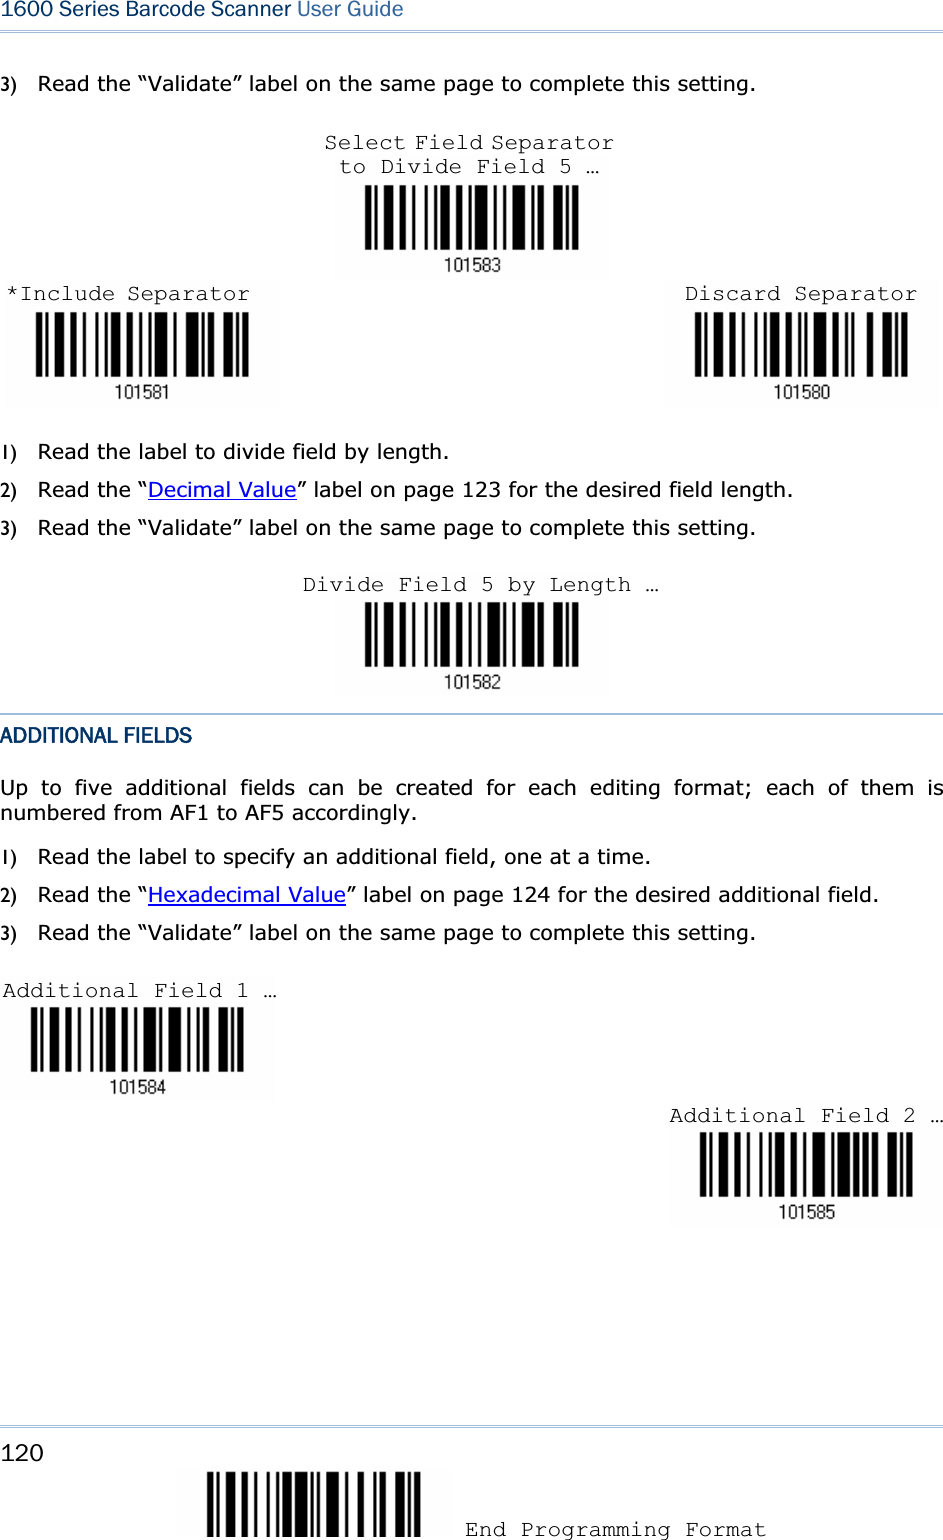 120 End Programming Format 1600 Series Barcode Scanner User Guide3) Read the “Validate” label on the same page to complete this setting. 1) Read the label to divide field by length. 2) Read the “Decimal Value” label on page 123 for the desired field length. 3) Read the “Validate” label on the same page to complete this setting. ADDITIONAL FIELDS Up to five additional fields can be created for each editing format; each of them is numbered from AF1 to AF5 accordingly.   1) Read the label to specify an additional field, one at a time. 2) Read the “Hexadecimal Value” label on page 124 for the desired additional field.   3) Read the “Validate” label on the same page to complete this setting. Additional Field 1 … Additional Field 2 …Select Field Separator to Divide Field 5 … Divide Field 5 by Length …*Include Separator Discard Separator